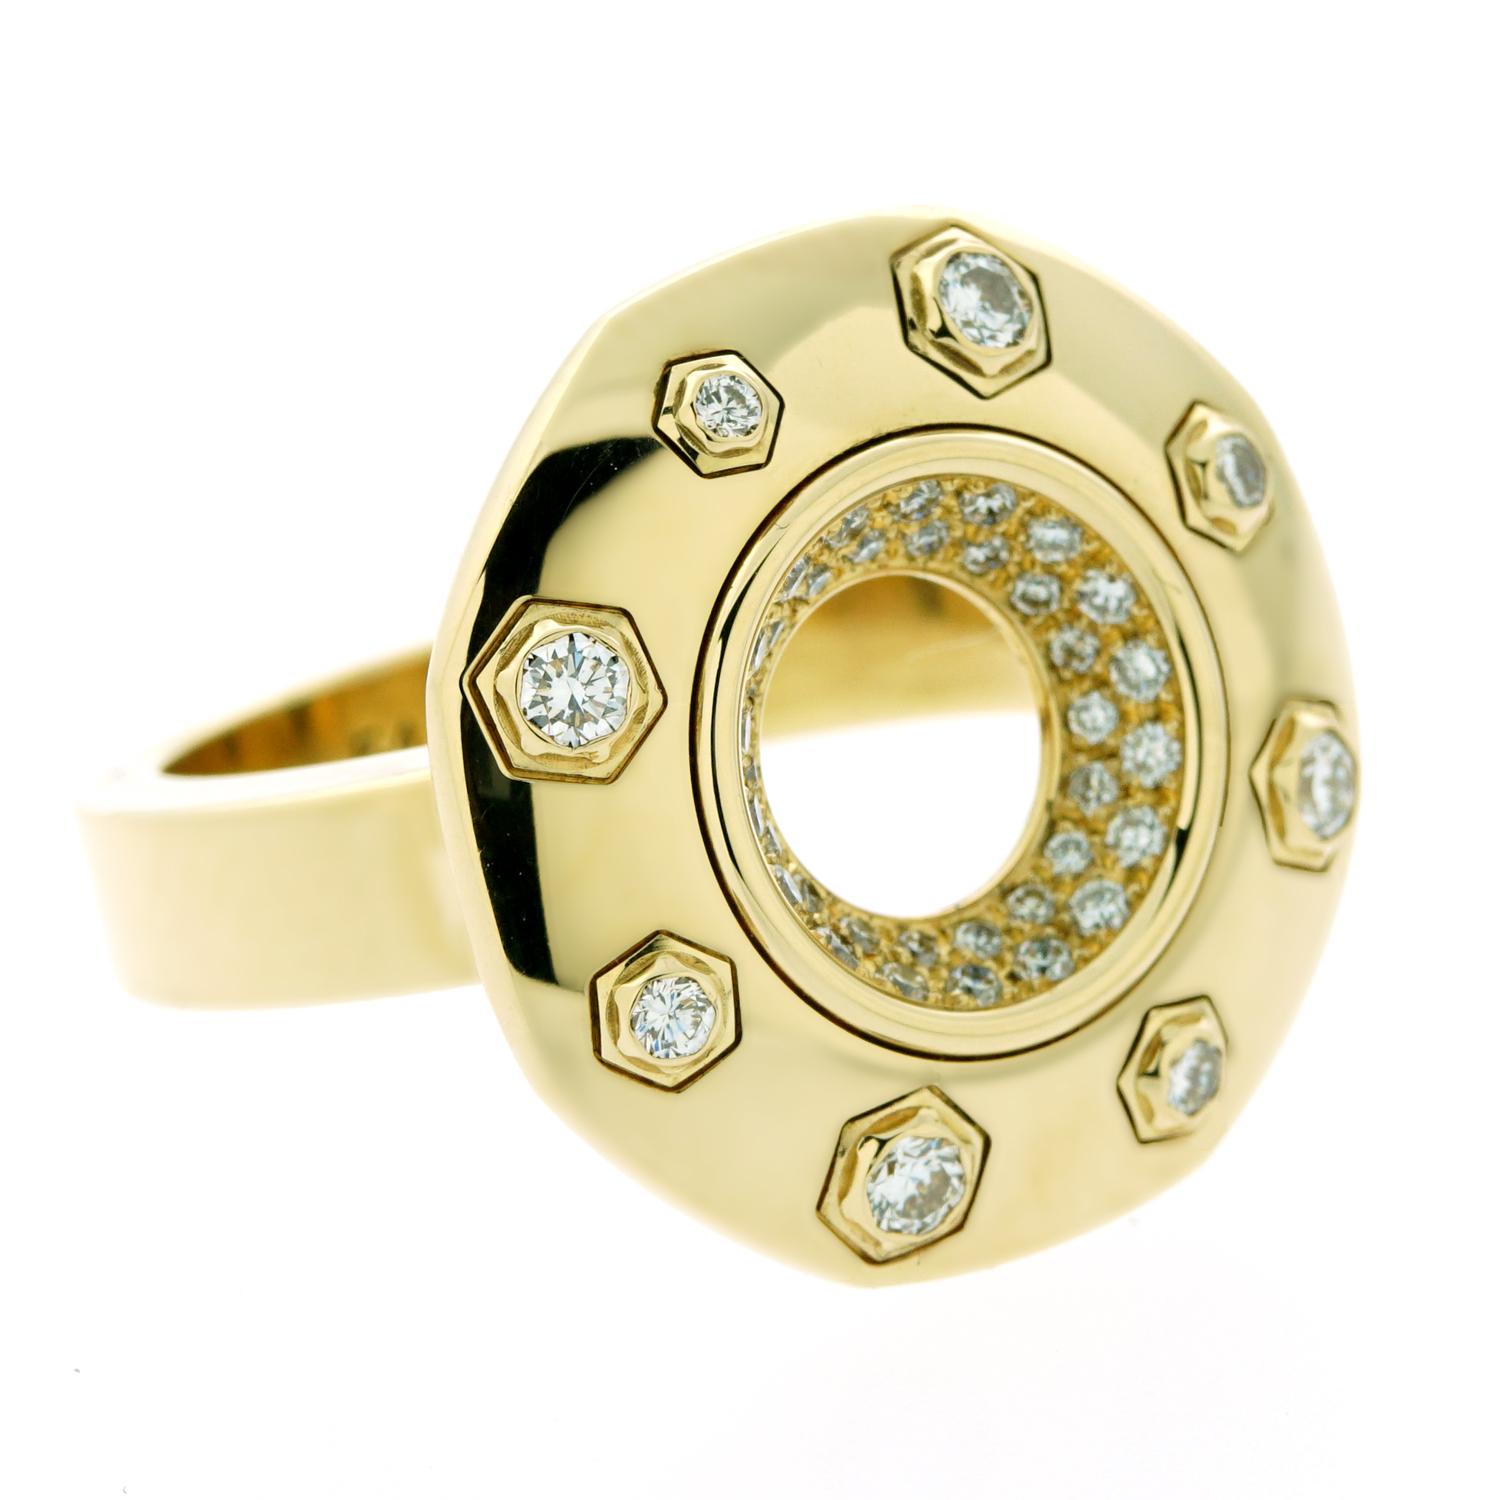 An opulent ring from Audemars Piguet's Royal Oak collection. Set in 18k yellow gold, this ring features Vvs clarity E-F color round brilliant cut diamonds. With eight diamonds set on the outer edge and 36 additional diamonds in the center, you're